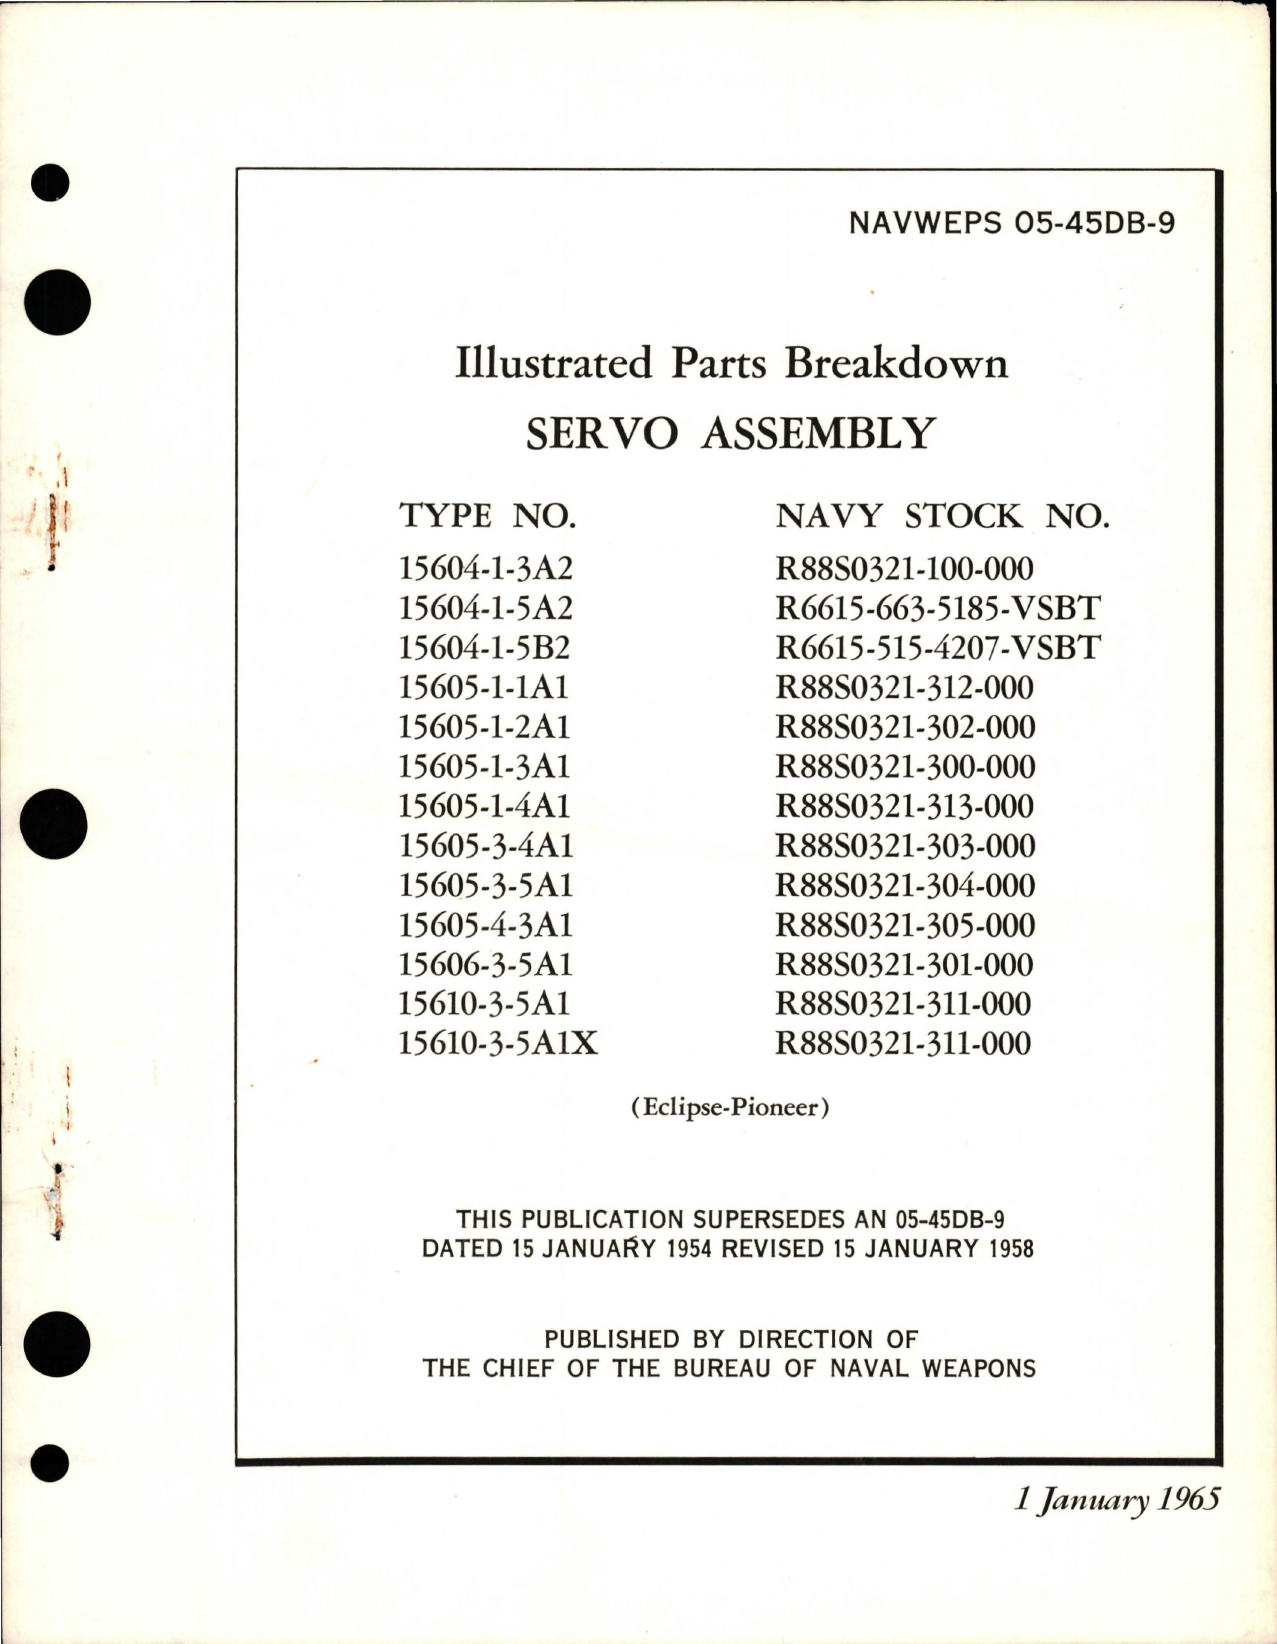 Sample page 1 from AirCorps Library document: Illustrated Parts Breakdown for Servo Assembly